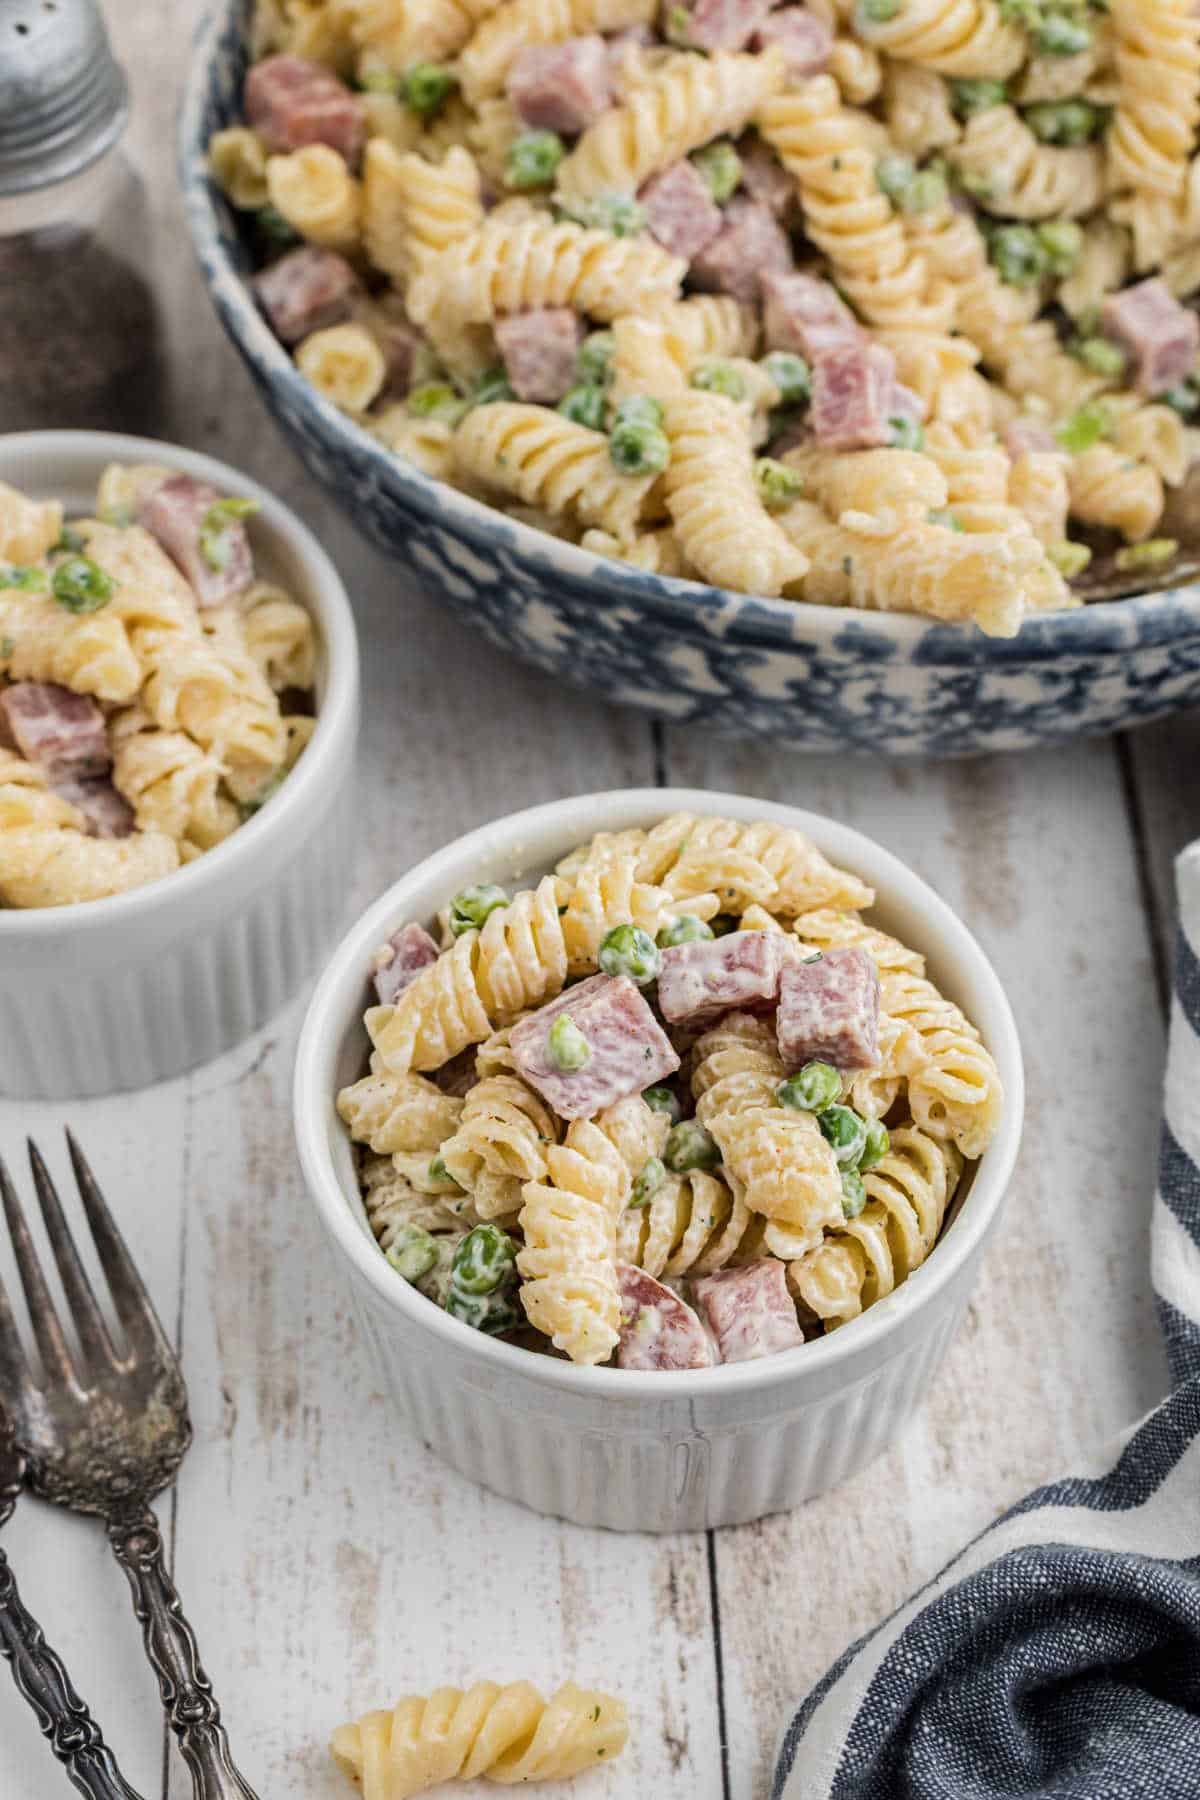 A dished up serving of Ruby Tuesday's Ham and Pea pasta salad.